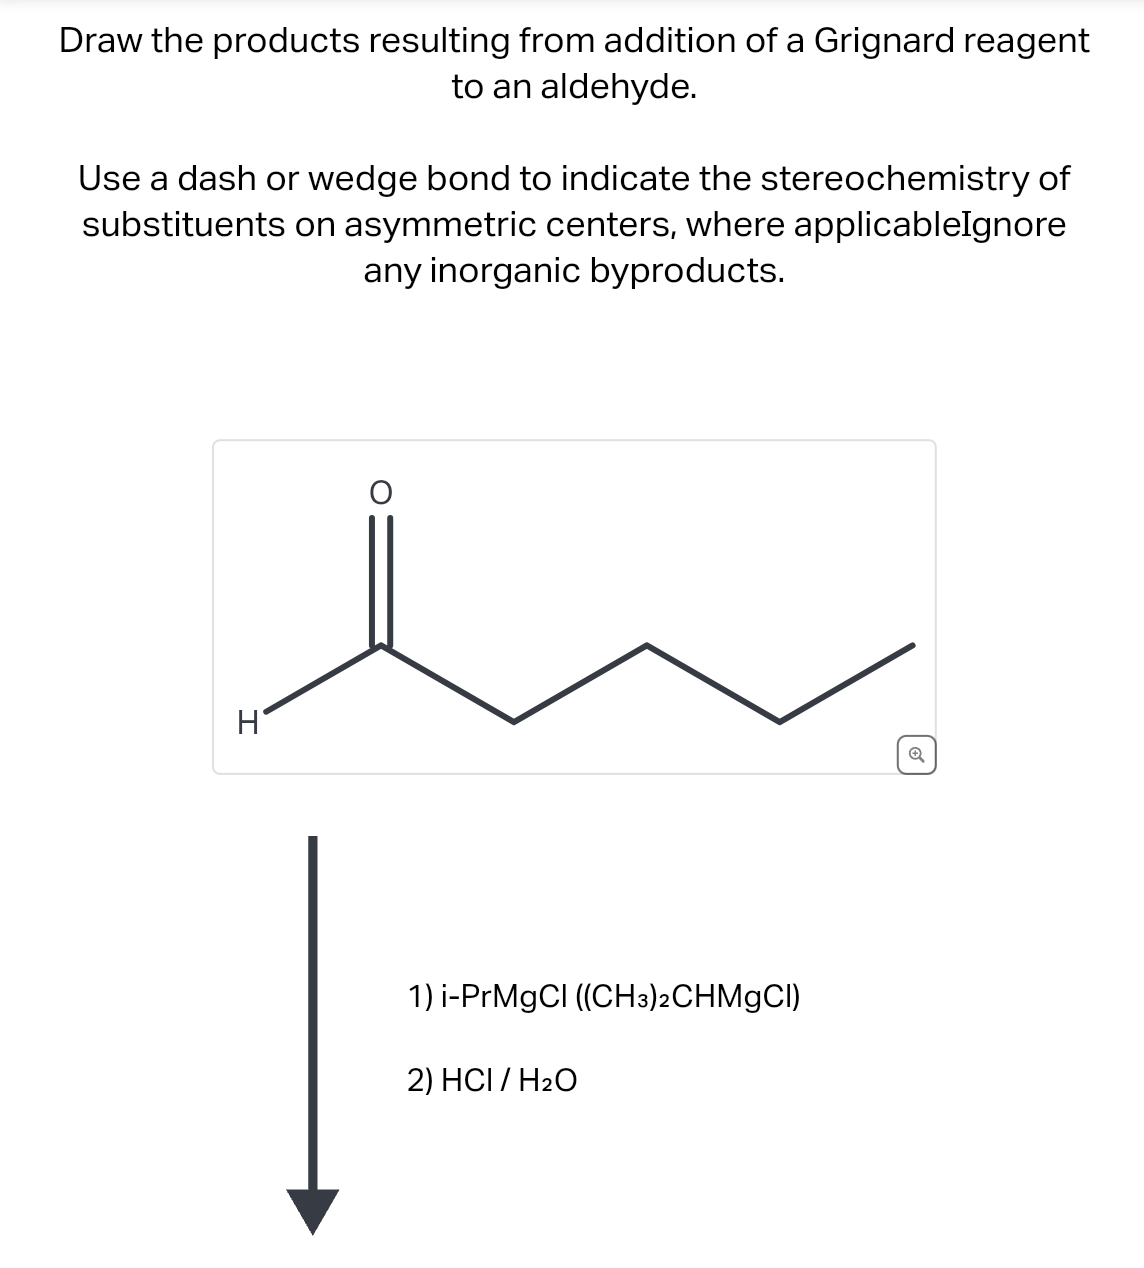 Draw the products resulting from addition of a Grignard reagent
to an aldehyde.
Use a dash or wedge bond to indicate the stereochemistry of
substituents on asymmetric centers, where applicableIgnore
any inorganic byproducts.
H
1) i-PrMgCl ((CH3)2CHMgCl)
2) HCI / H₂O
Q